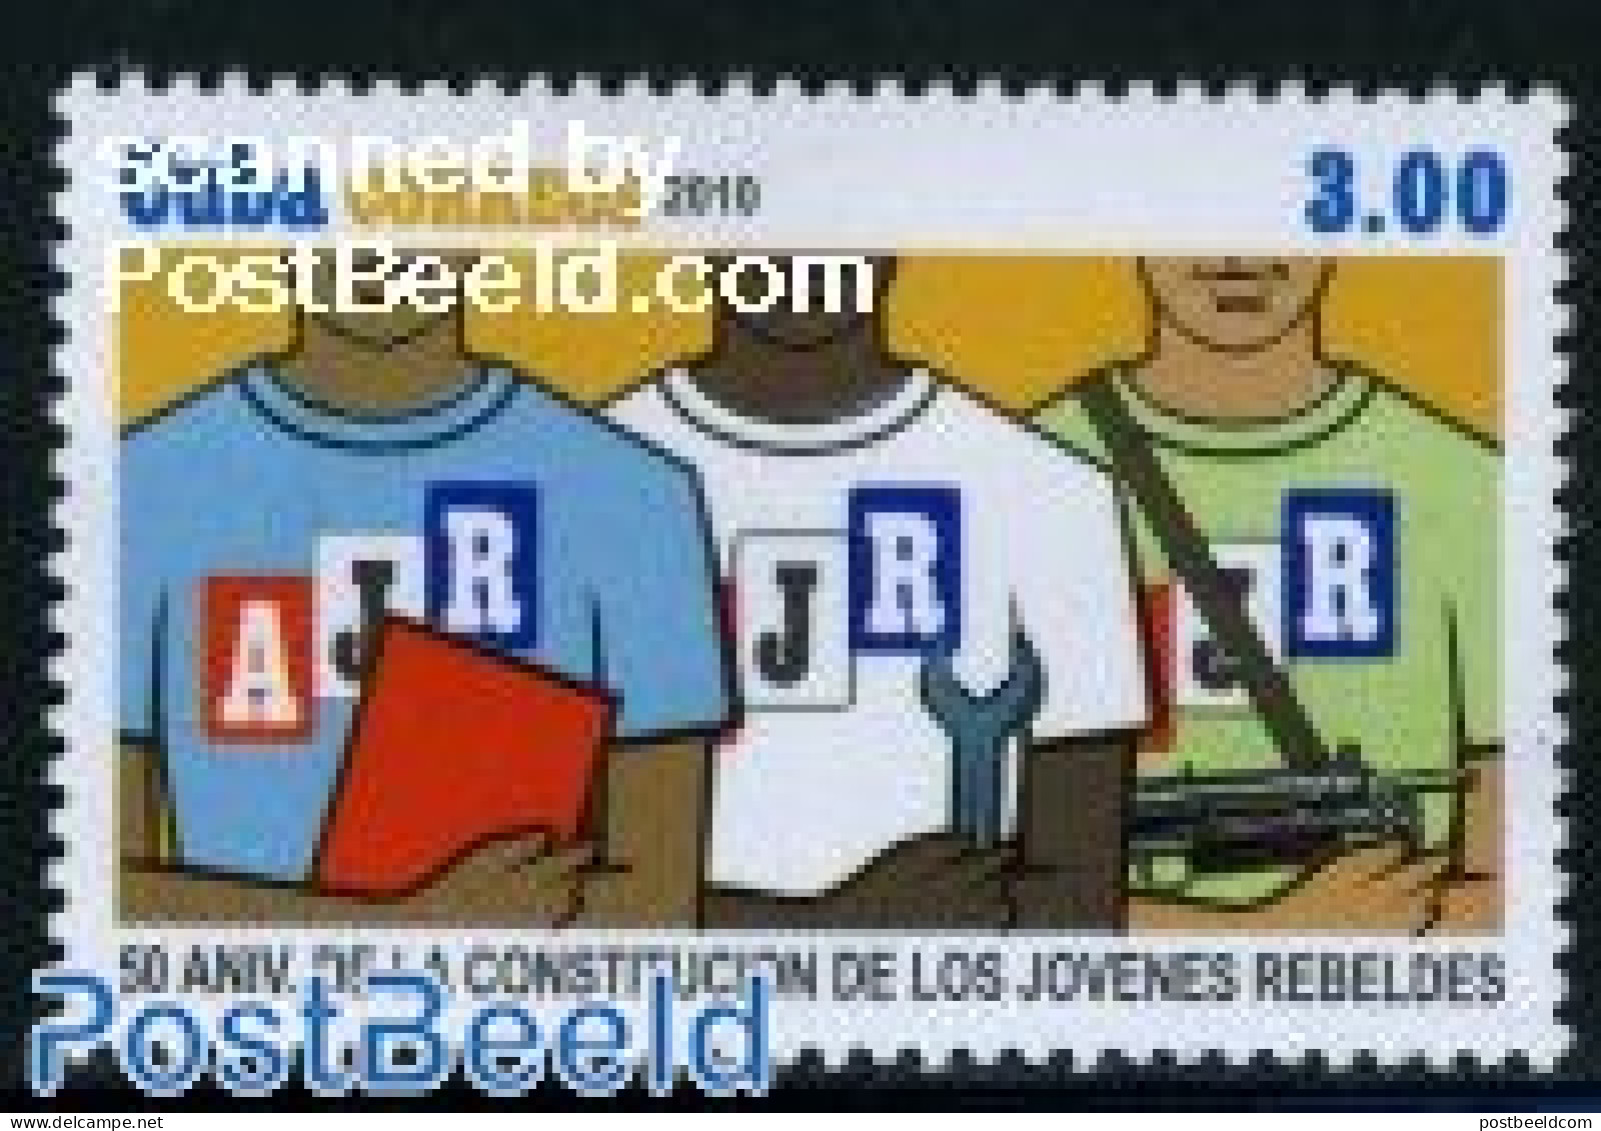 Cuba 2010 Young Rebels 1v, Mint NH - Unused Stamps